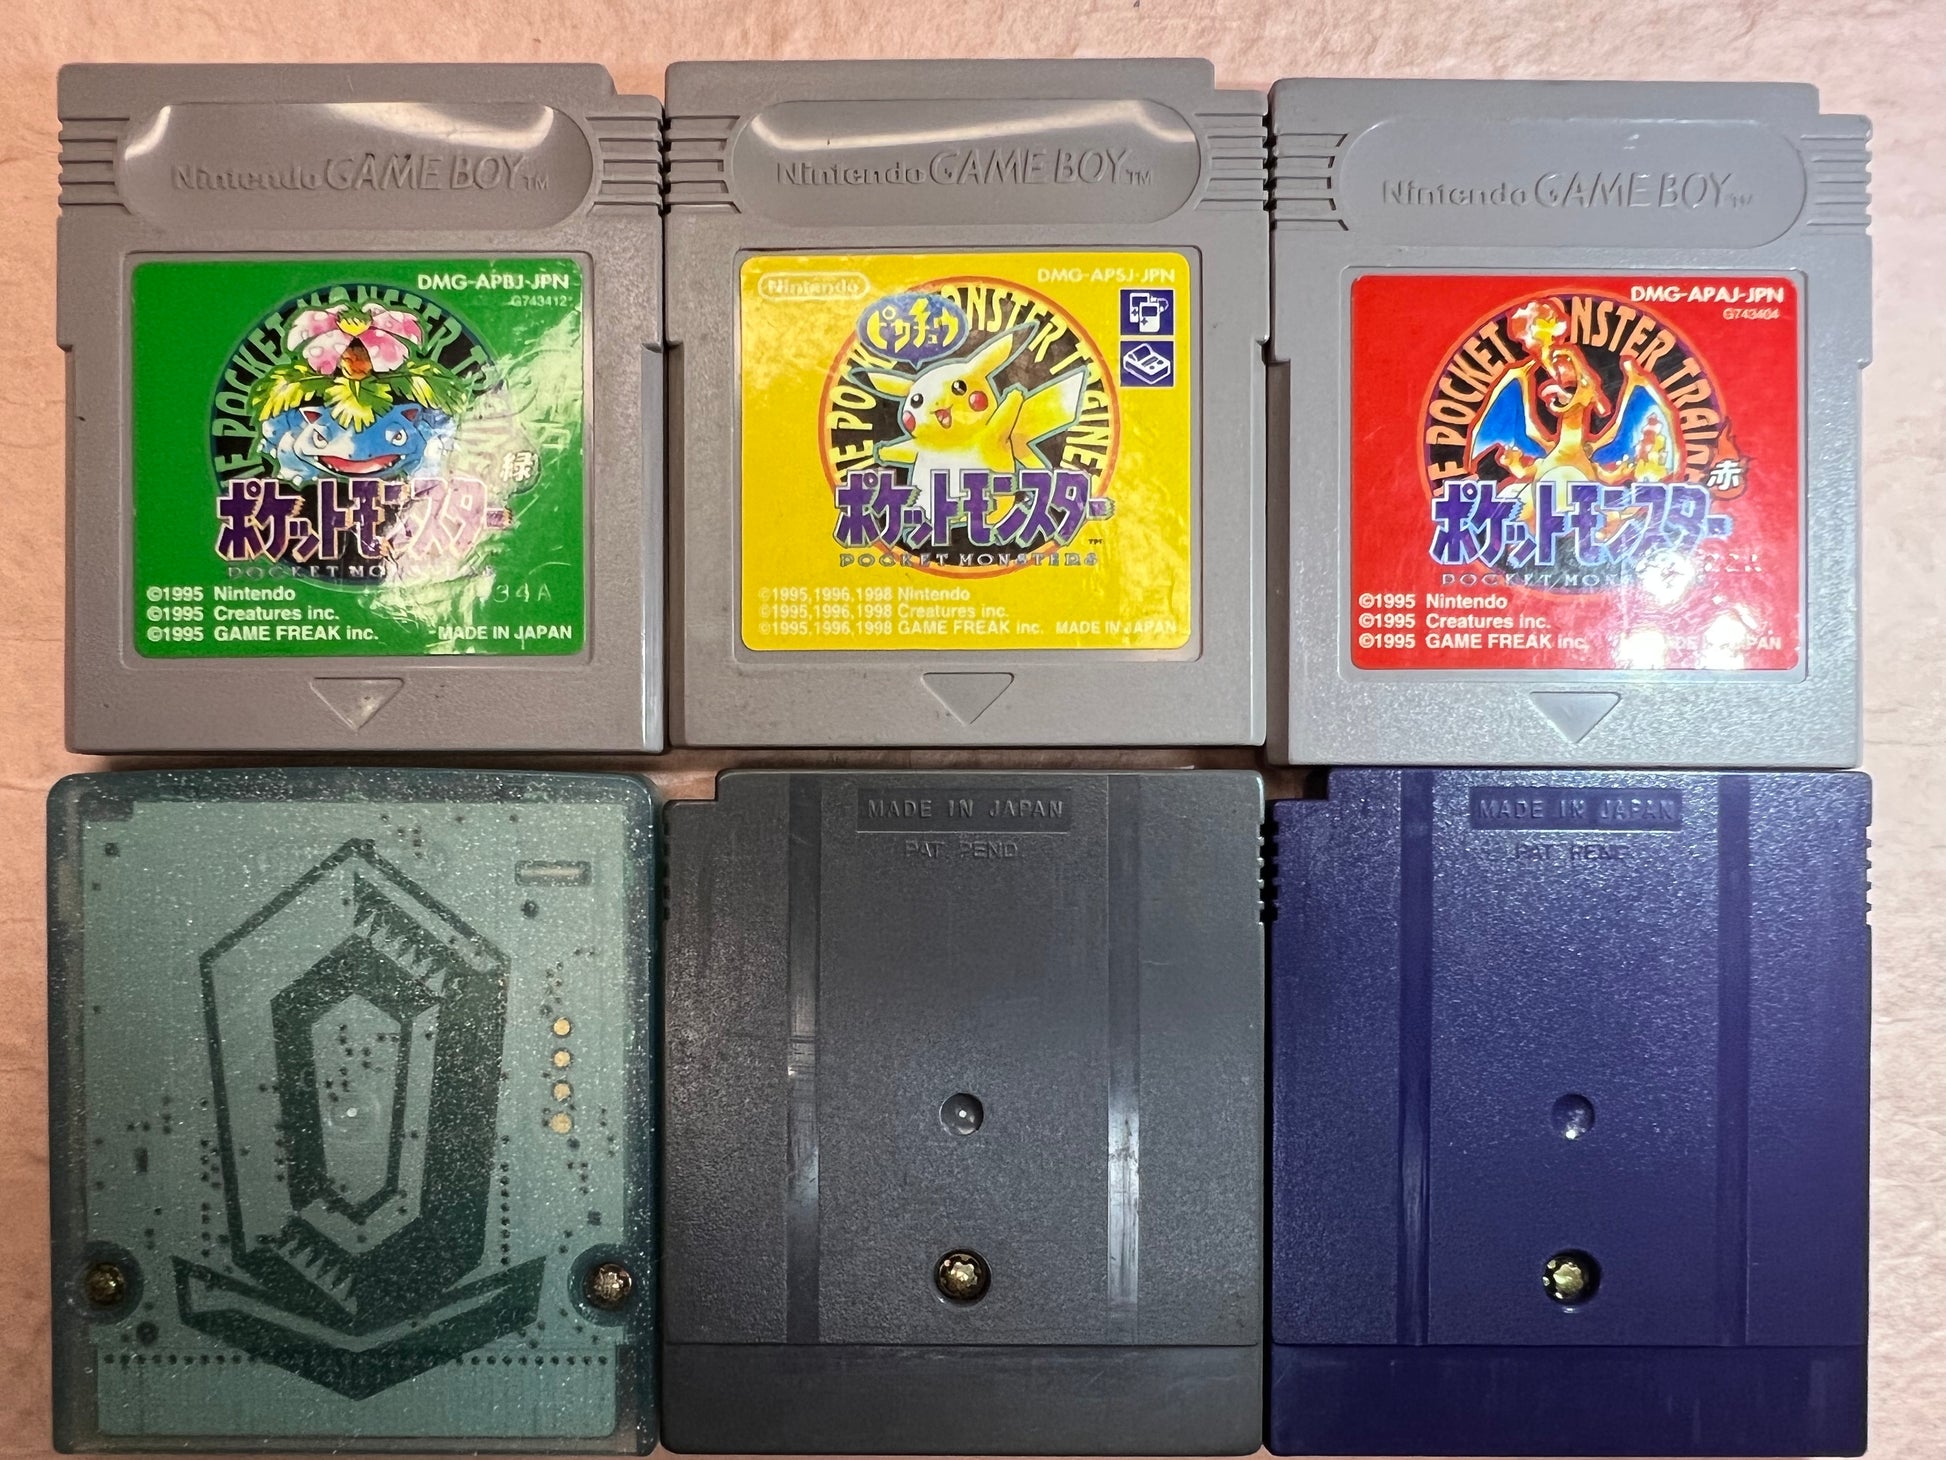 Pokemon Red Blue Yellow Gold Silver Green Version Set of 6 